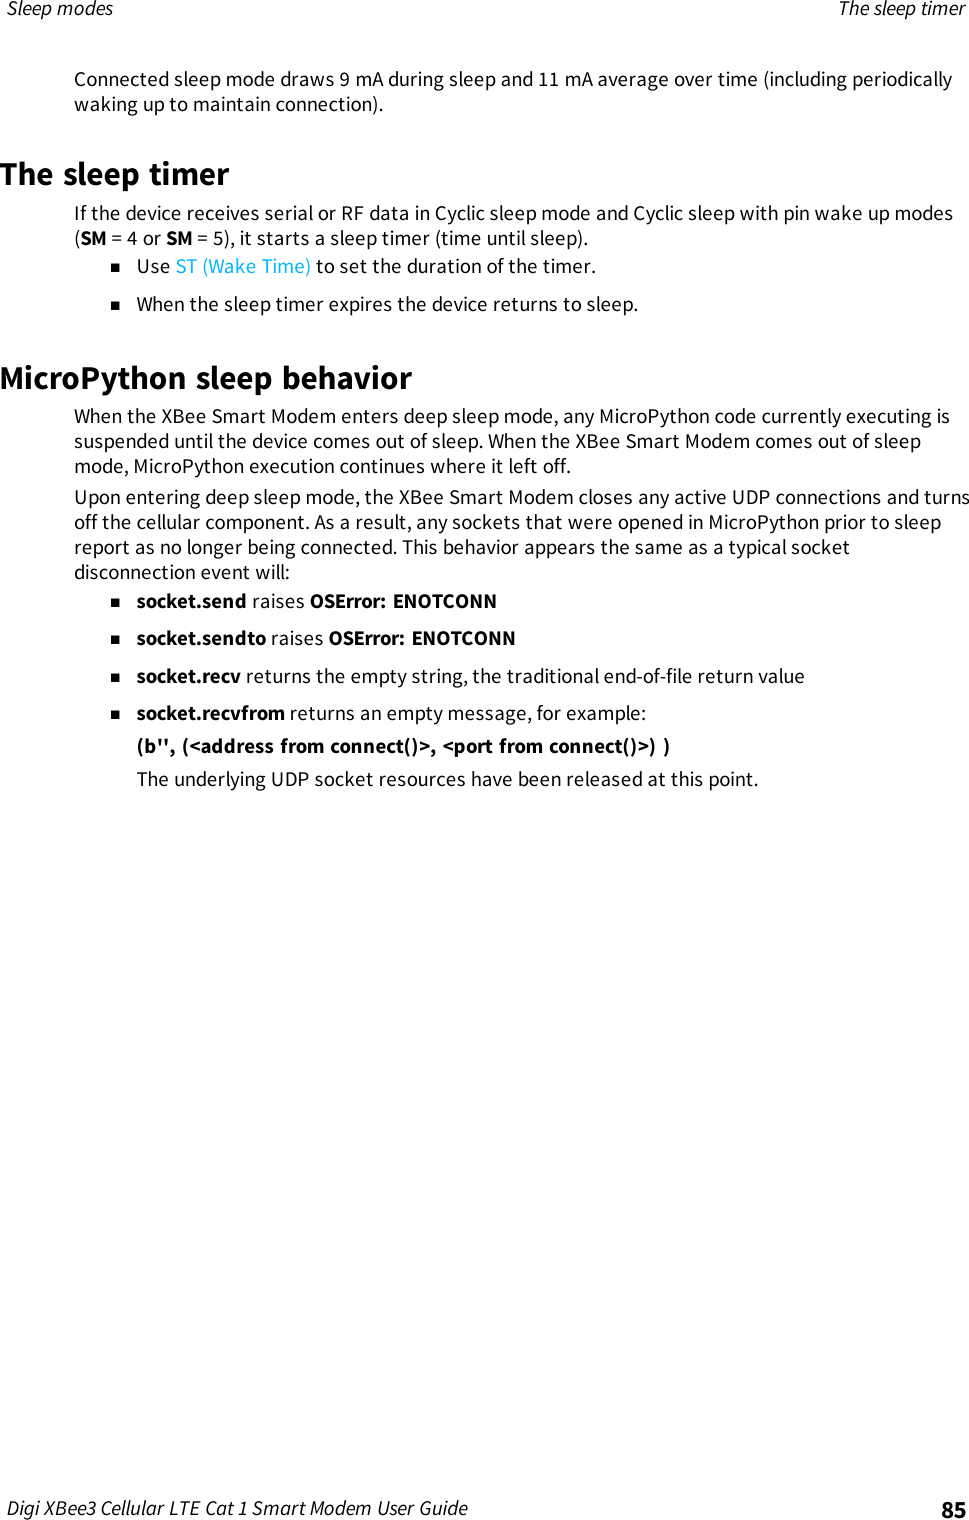 Sleep modes The sleep timerDigi XBee3 Cellular LTE Cat 1 Smart Modem User Guide 85Connected sleep mode draws 9 mA during sleep and 11 mA average over time (including periodicallywaking up to maintain connection).The sleep timerIf the device receives serial or RF data in Cyclic sleep mode and Cyclic sleep with pin wake up modes(SM = 4 or SM = 5), it starts a sleep timer (time until sleep).nUse ST (Wake Time) to set the duration of the timer.nWhen the sleep timer expires the device returns to sleep.MicroPython sleep behaviorWhen the XBee Smart Modem enters deep sleep mode, any MicroPython code currently executing issuspended until the device comes out of sleep. When the XBee Smart Modem comes out of sleepmode, MicroPython execution continues where it left off.Upon entering deep sleep mode, the XBee Smart Modem closes any active UDP connections and turnsoff the cellular component. As a result, any sockets that were opened in MicroPython prior to sleepreport as no longer being connected. This behavior appears the same as a typical socketdisconnection event will:nsocket.send raises OSError: ENOTCONNnsocket.sendto raises OSError: ENOTCONNnsocket.recv returns the empty string, the traditional end-of-file return valuensocket.recvfrom returns an empty message, for example:(b&apos;&apos;, (&lt;address from connect()&gt;, &lt;port from connect()&gt;) )The underlying UDP socket resources have been released at this point.